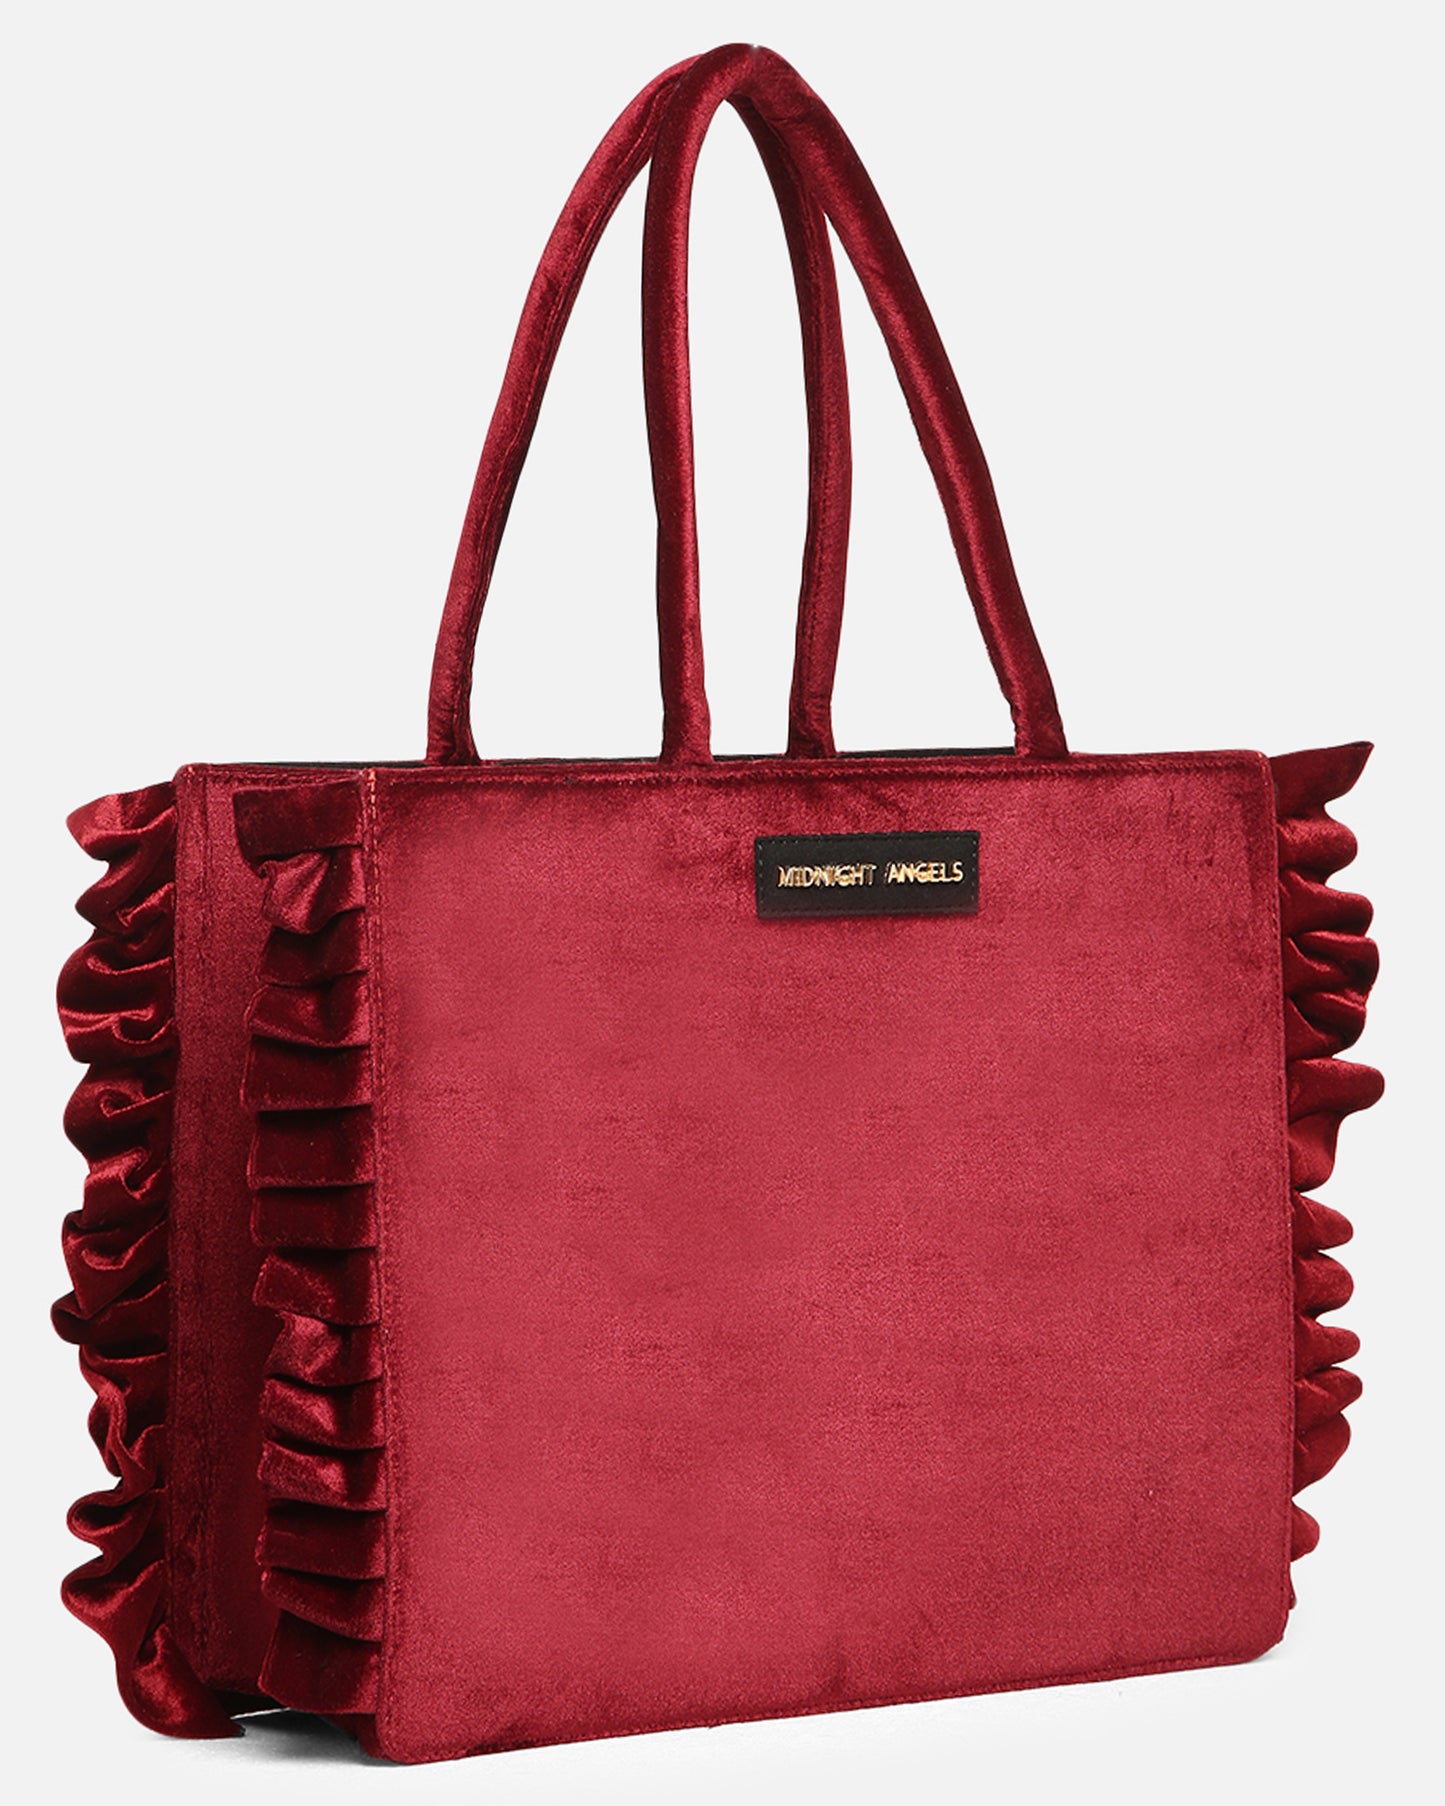 The Sparkling Lioness Tote Bag (Maroon)